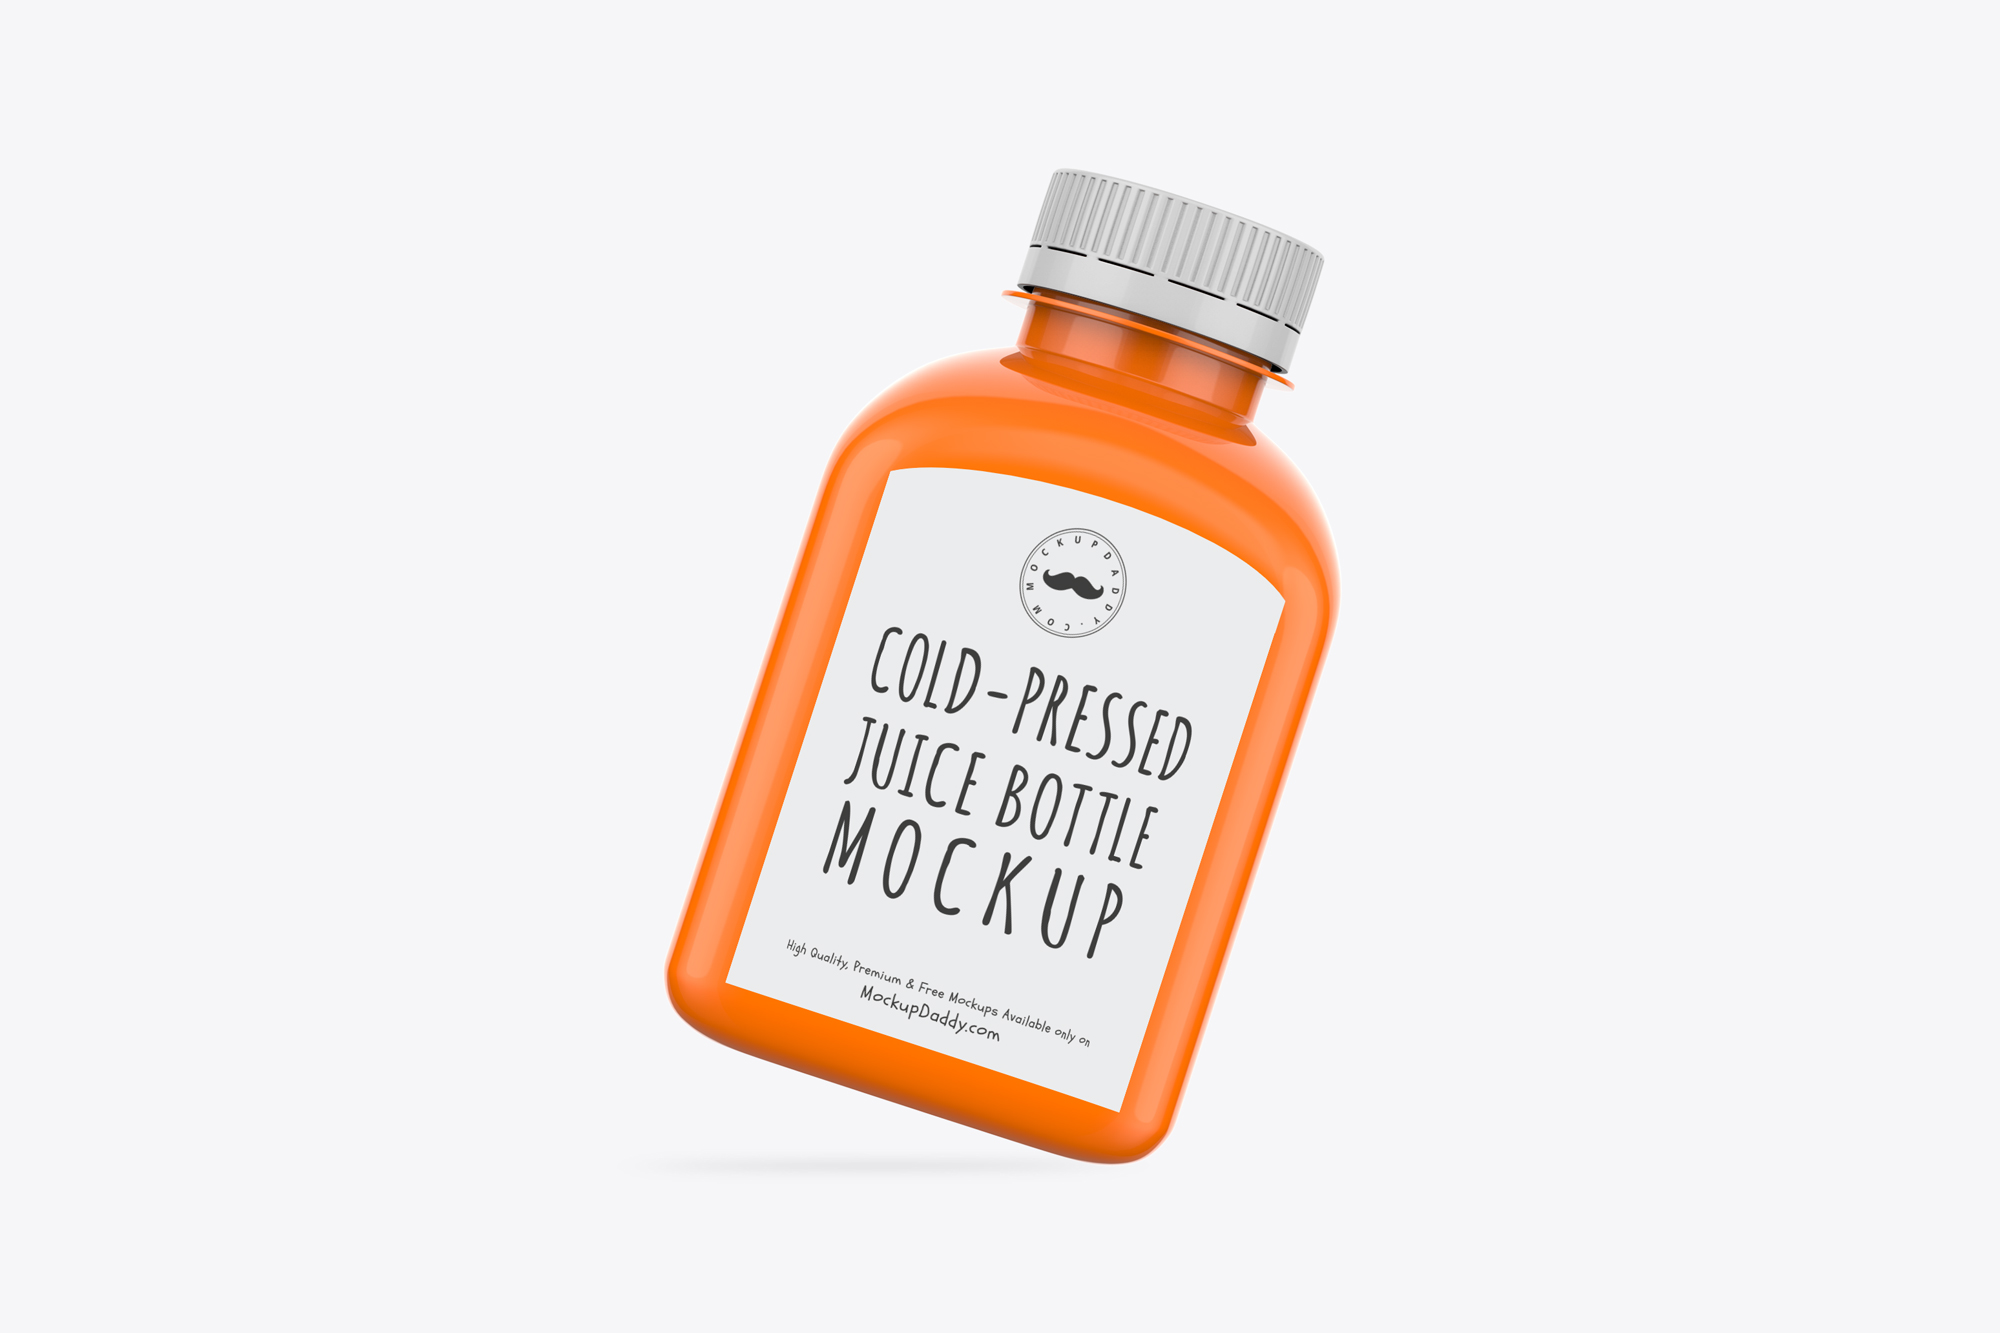 Mini Juice Bottle Psd Mockup with white label and cap.